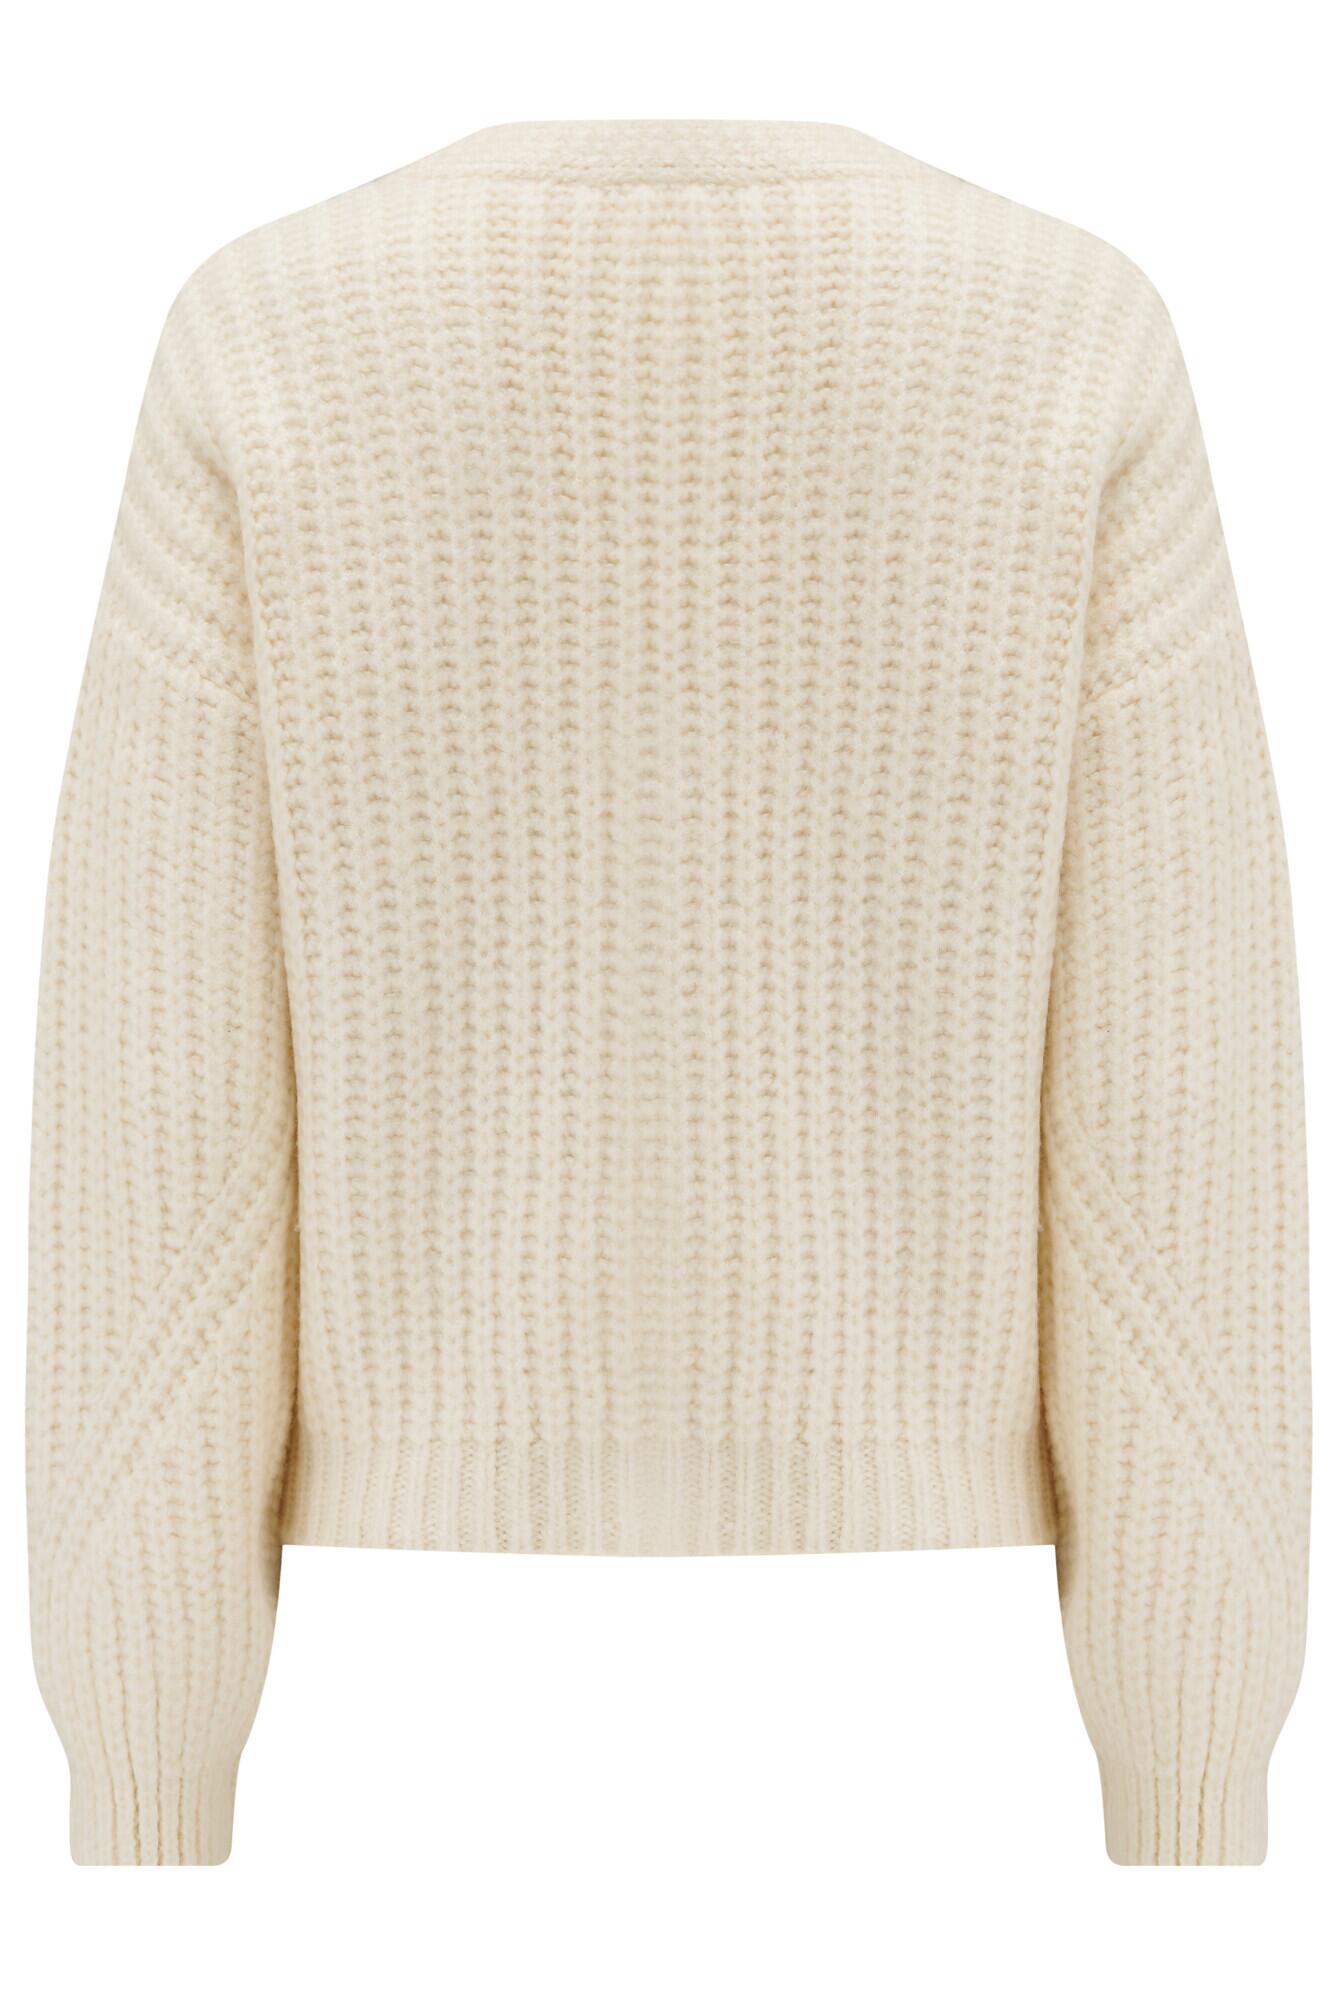 Buy Lipsy Oatmeal Mixed Cable Knit Cardigan from the Next UK online shop